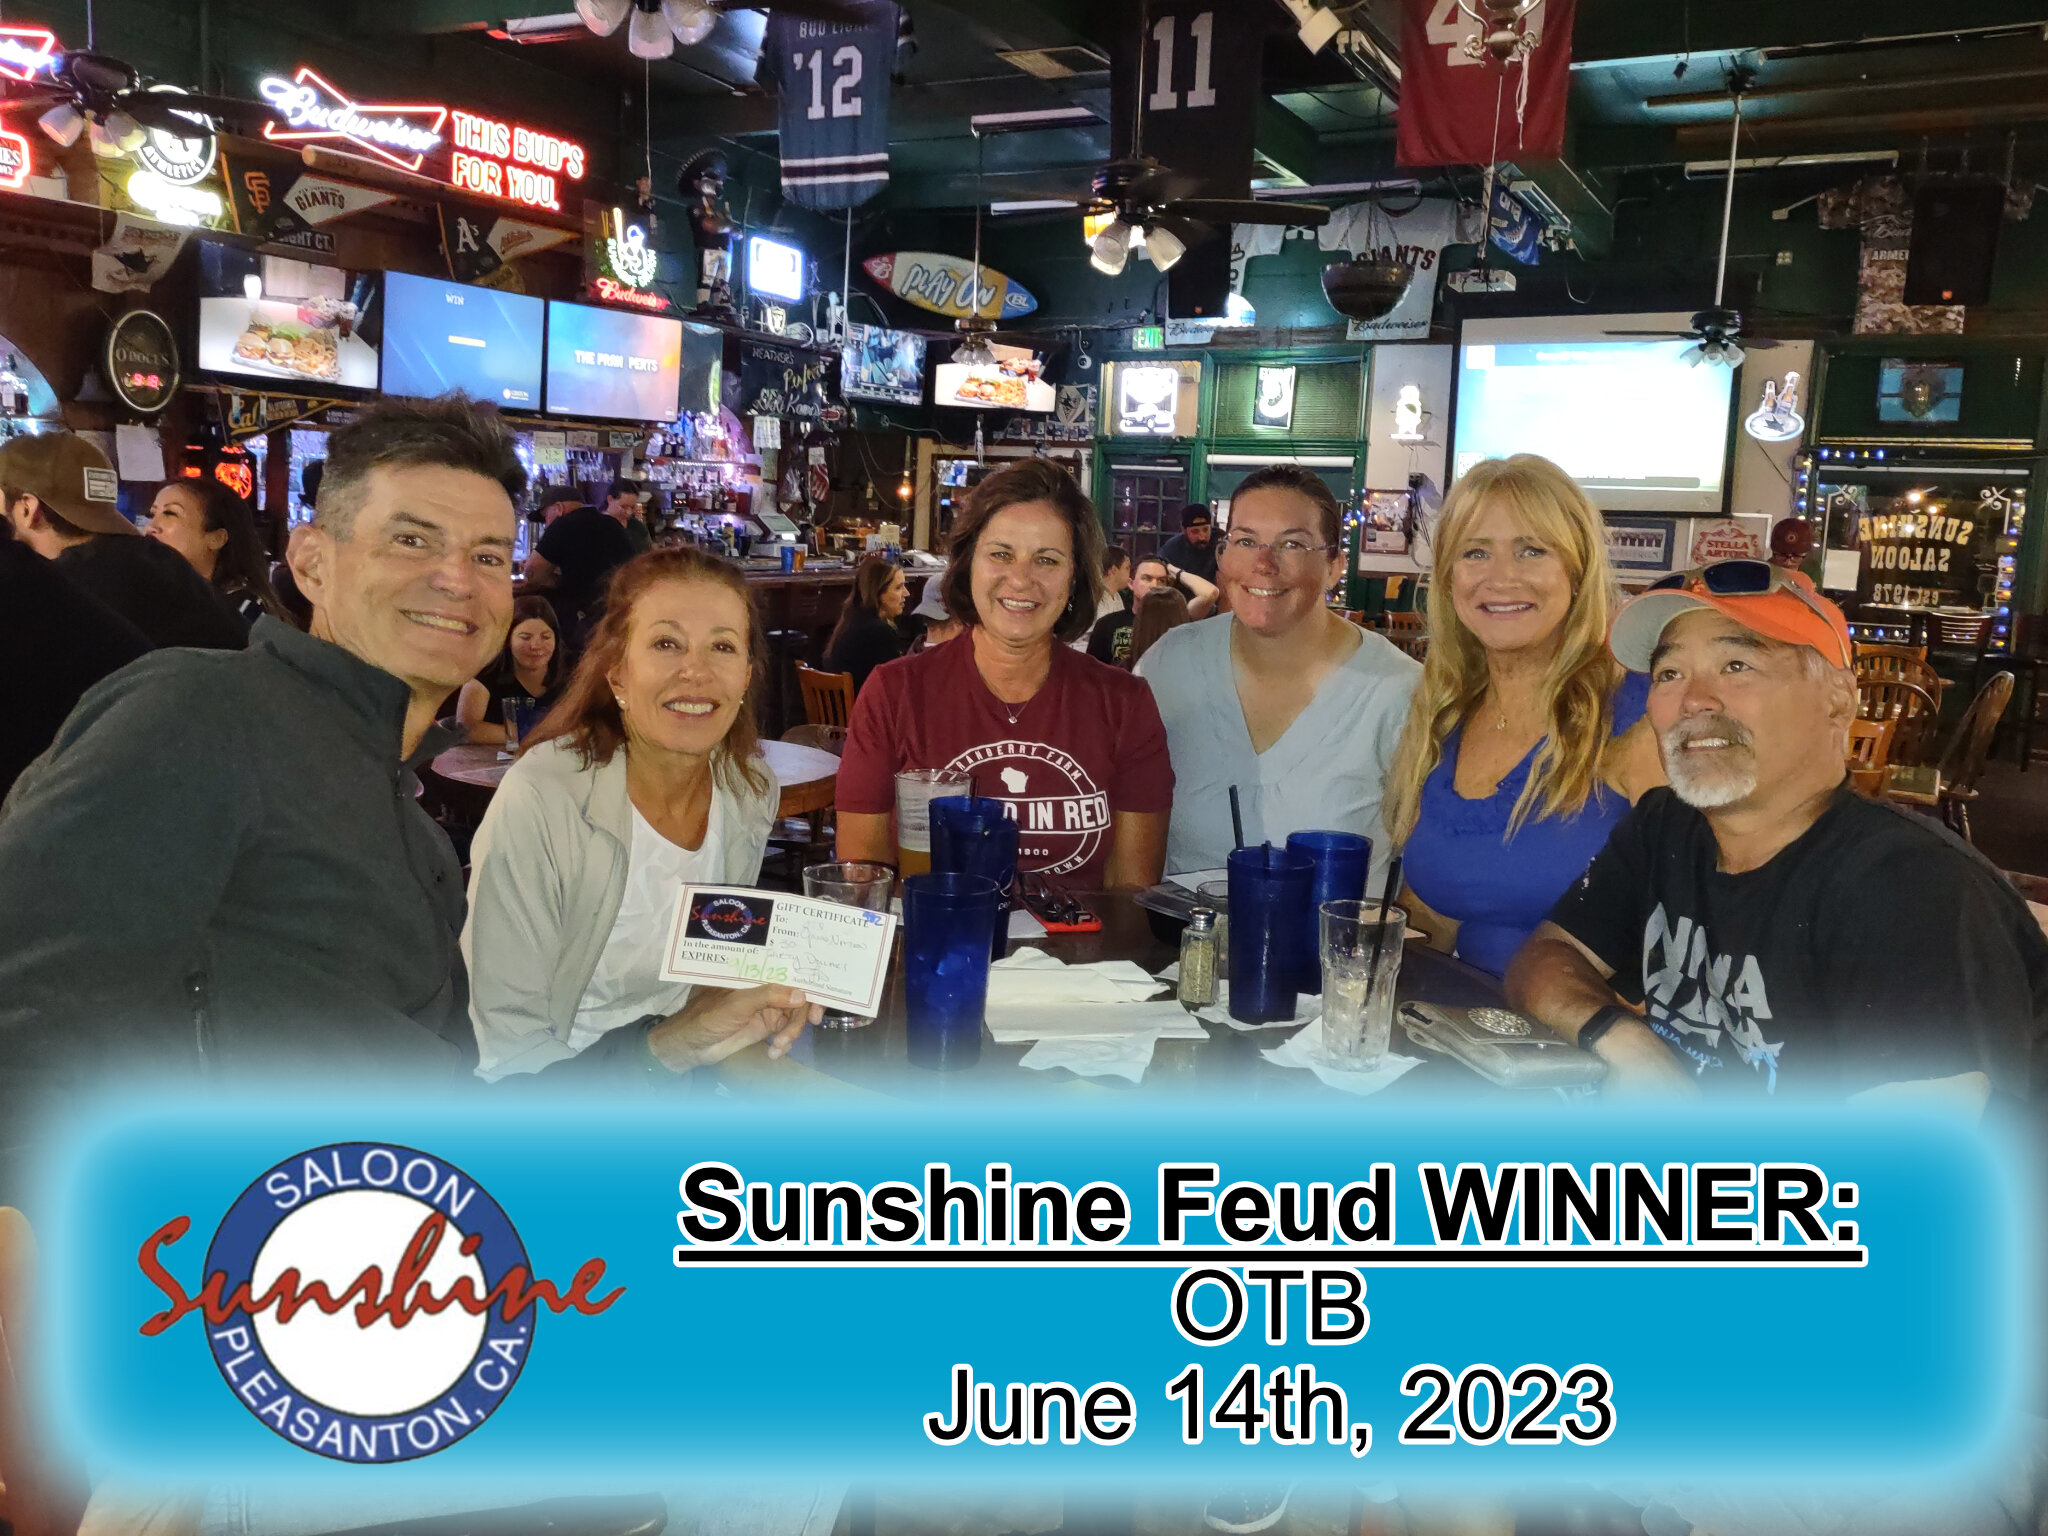 Congratulations to our Sunshine Feud trivia winners last Wednesday: OTB!

Come out Wednesday nights for your chance to win our family feud style trivia night here at #Sunshinesaloon!